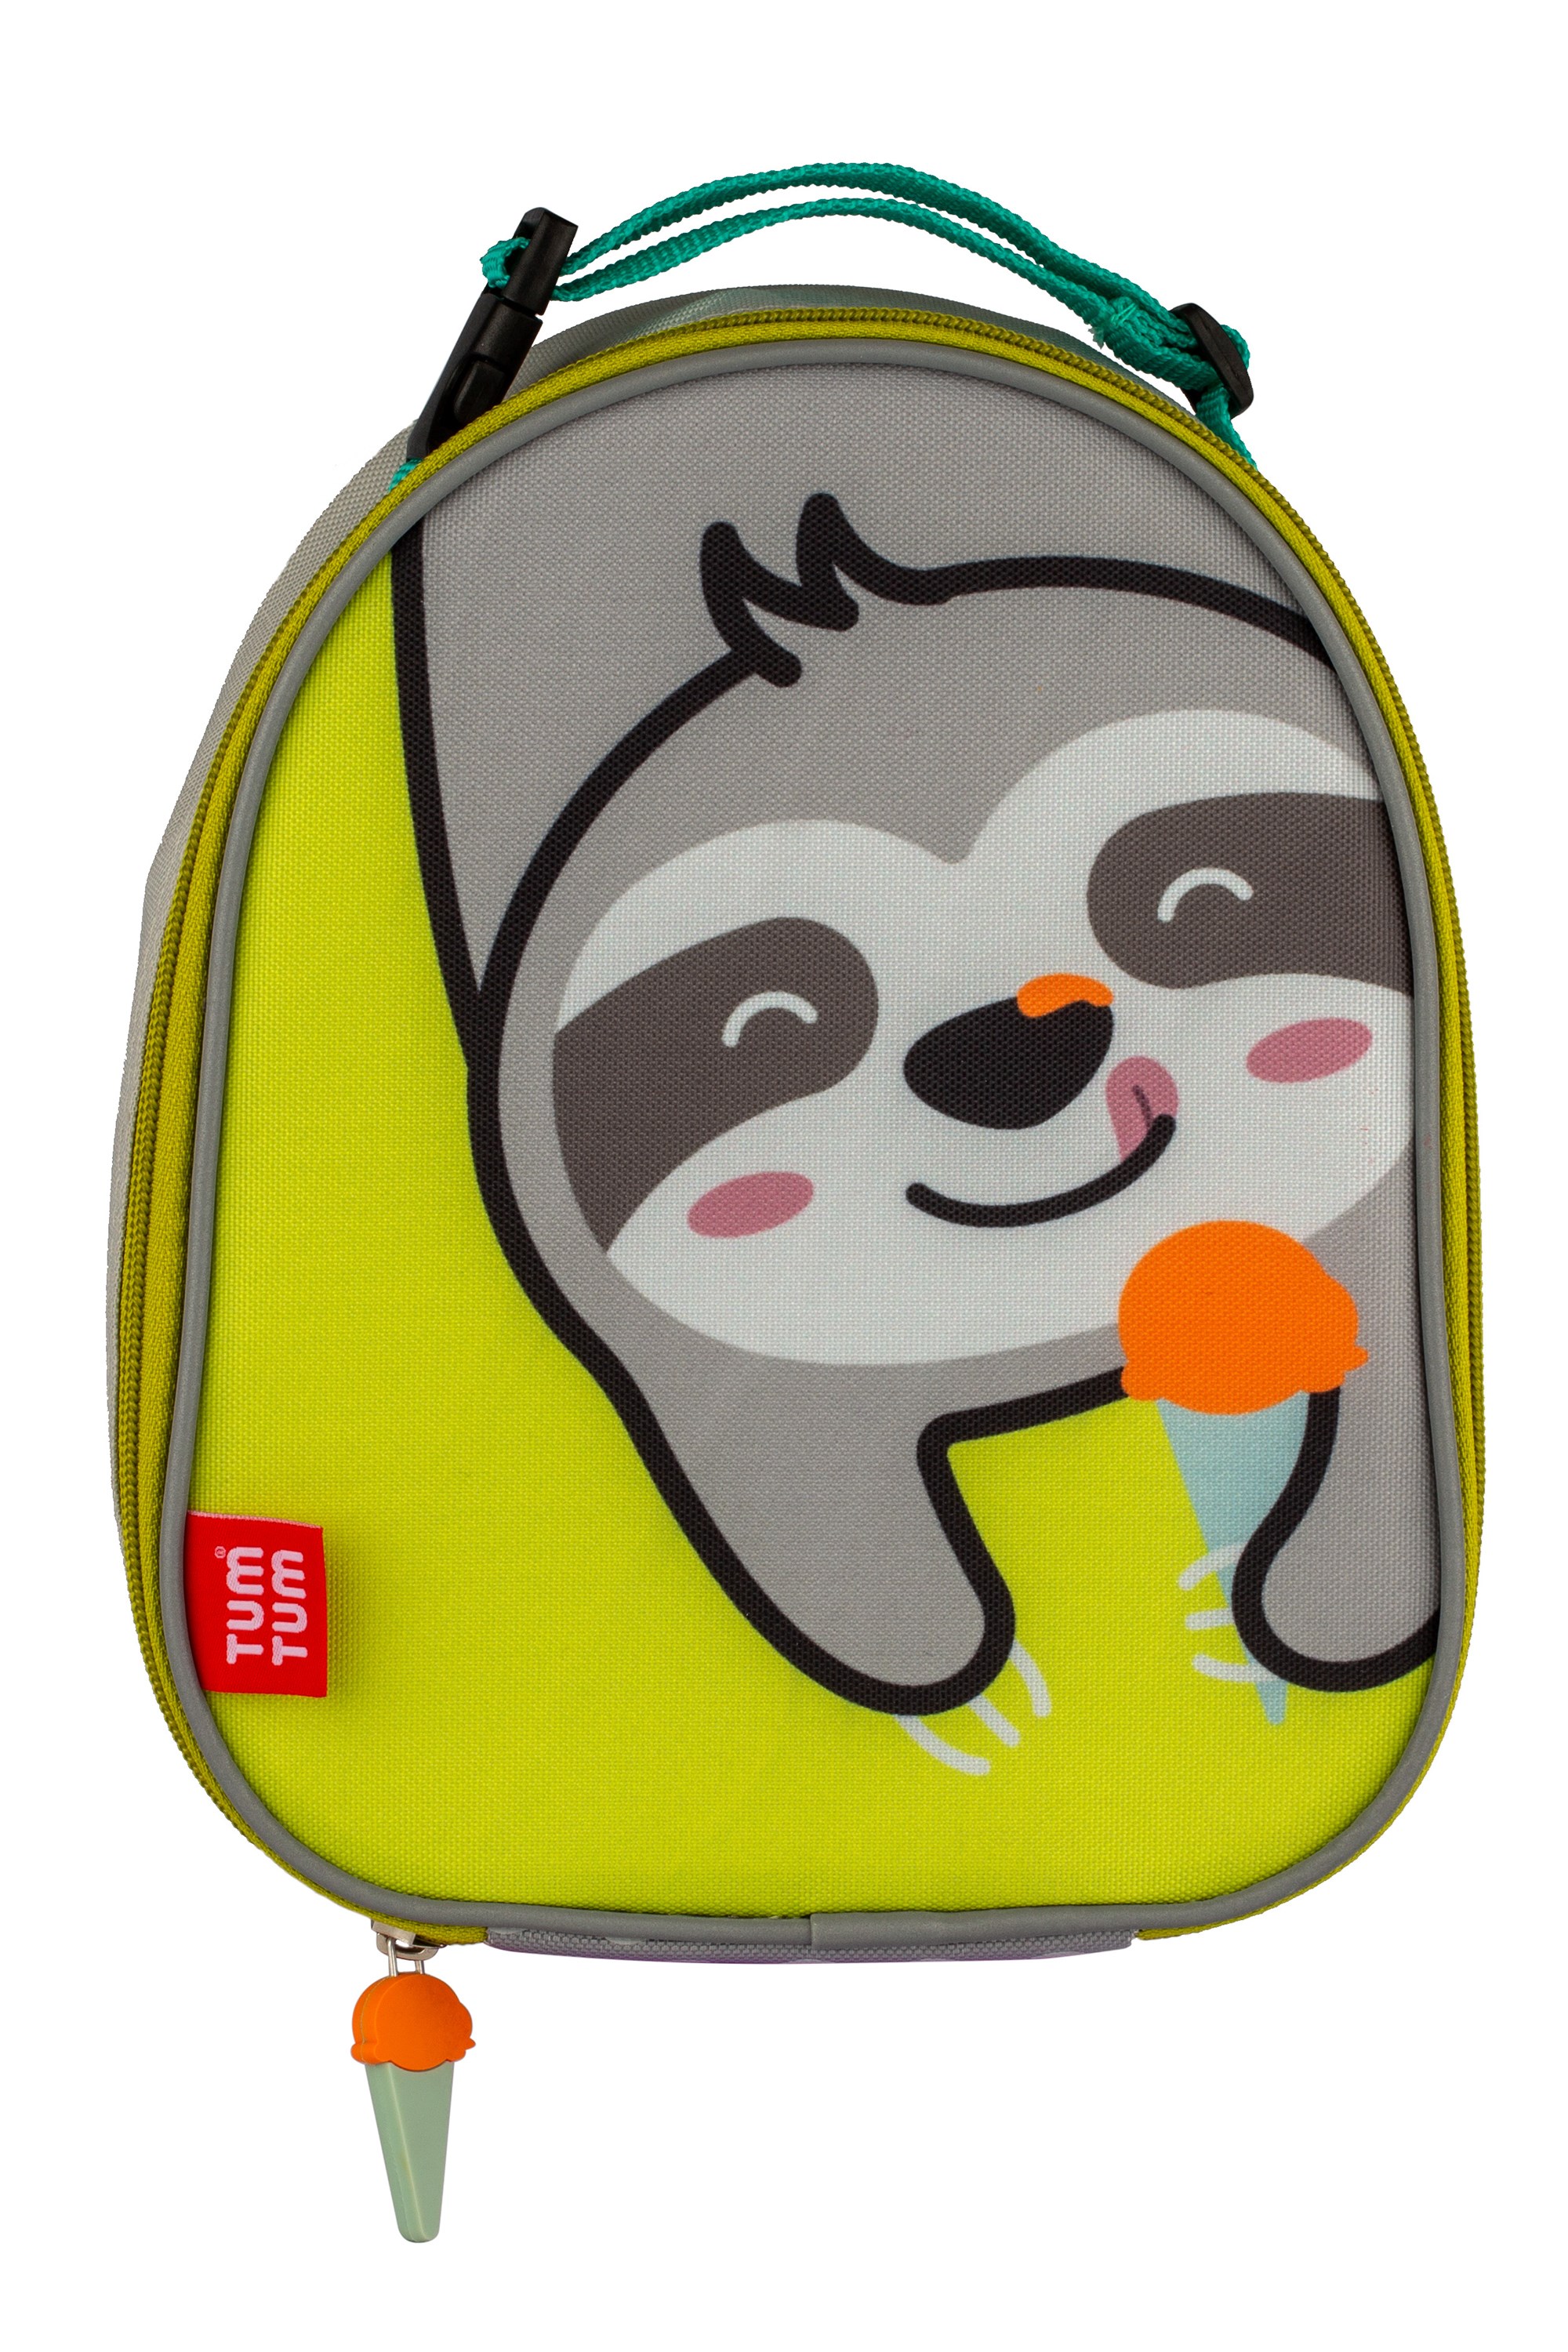 Kids Insulated Lunch Box Bag -